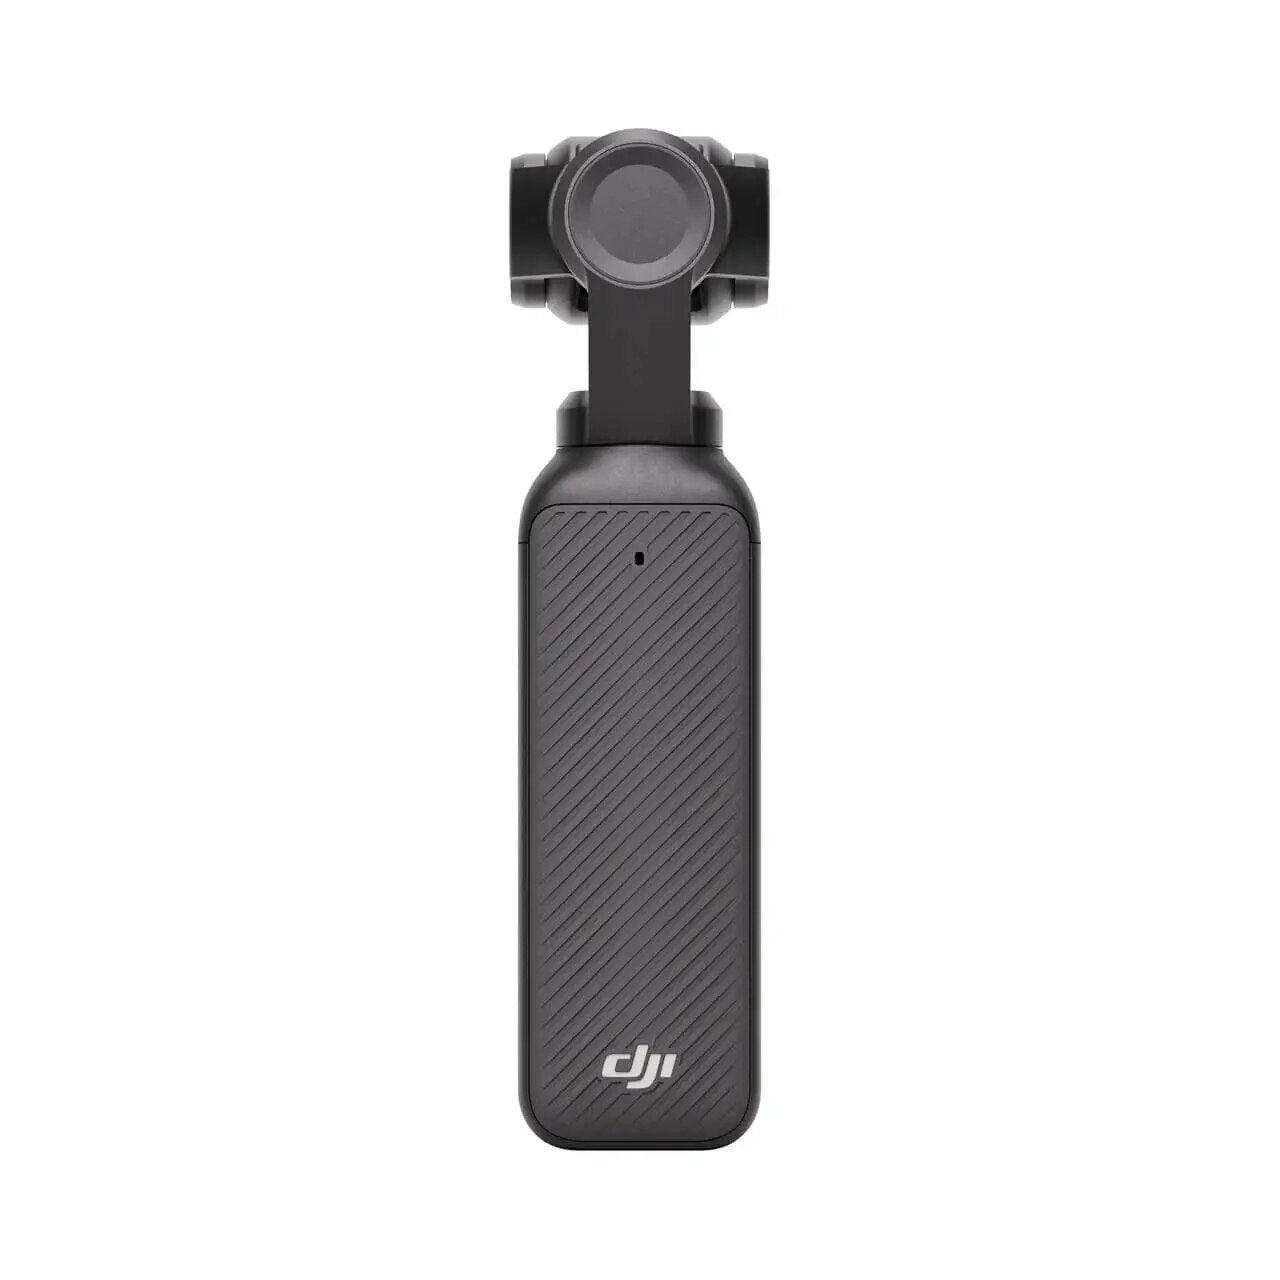 DJI Osmo Pocket 3 - Vlogging Camera with 1'' CMOS&4K/120fps Video Face/Object Tracking 2" Rotatable Touchscreen Small Video Camera